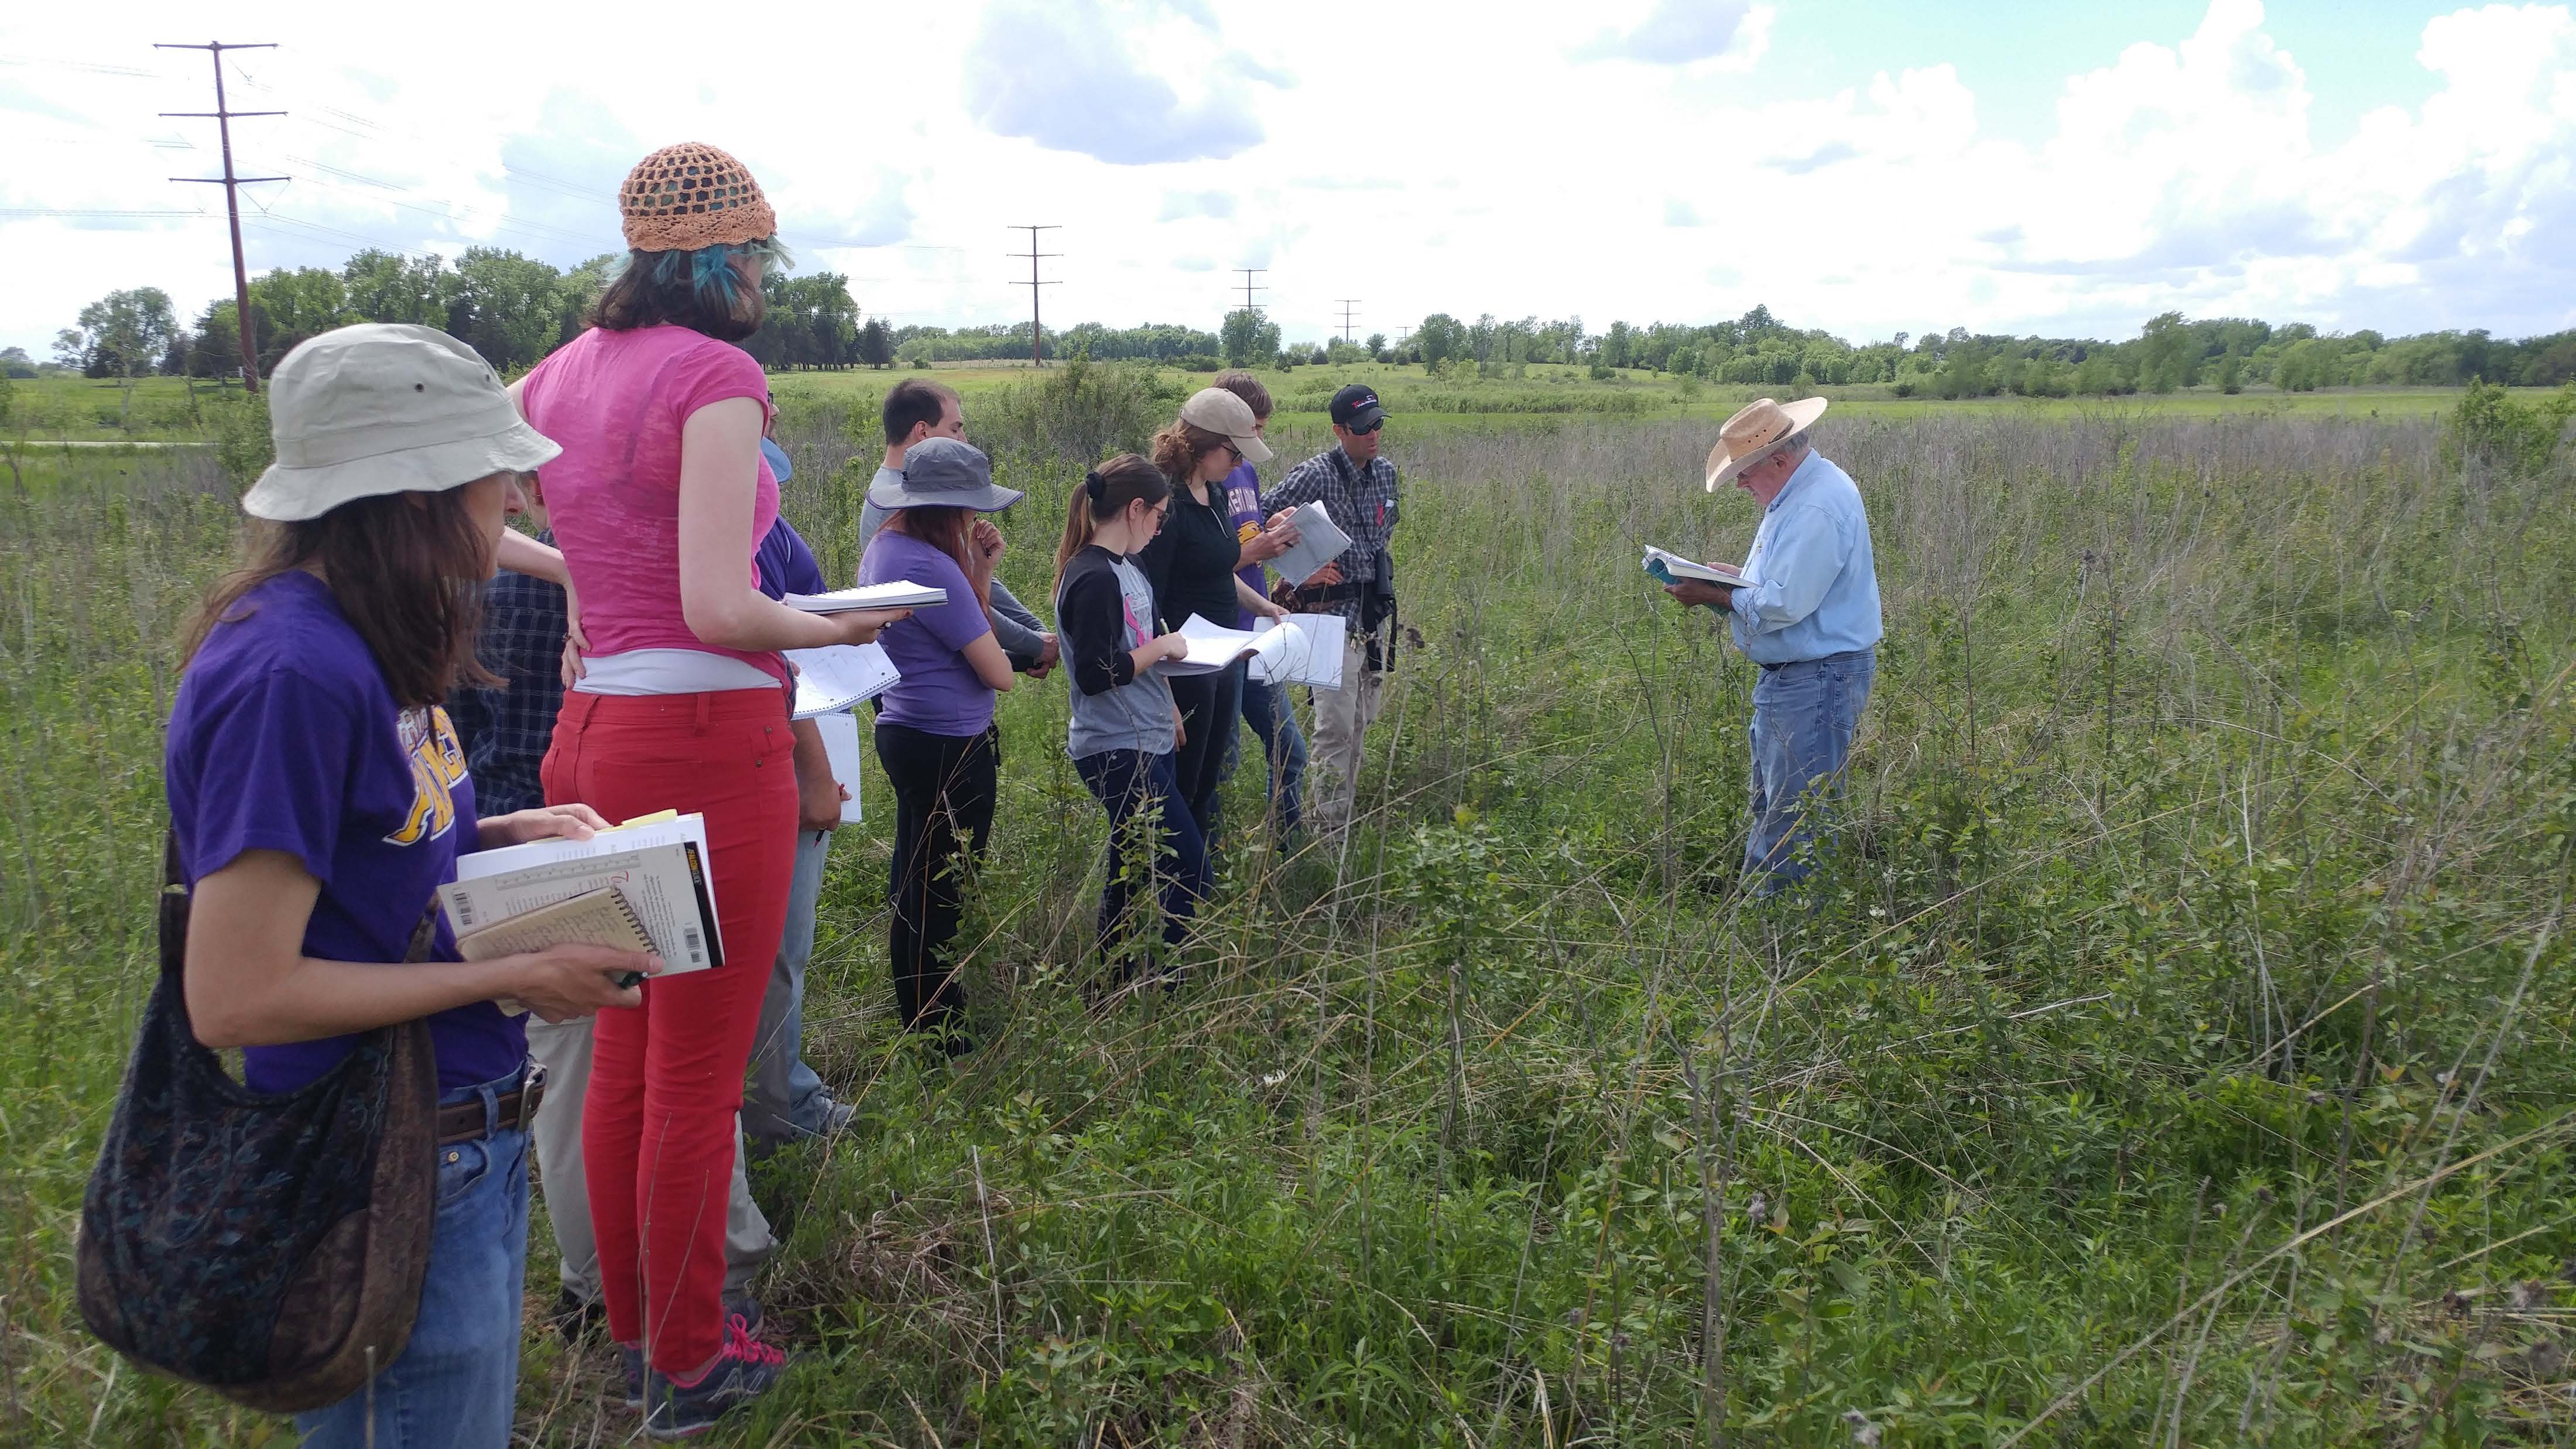 Students identifying plants in the field